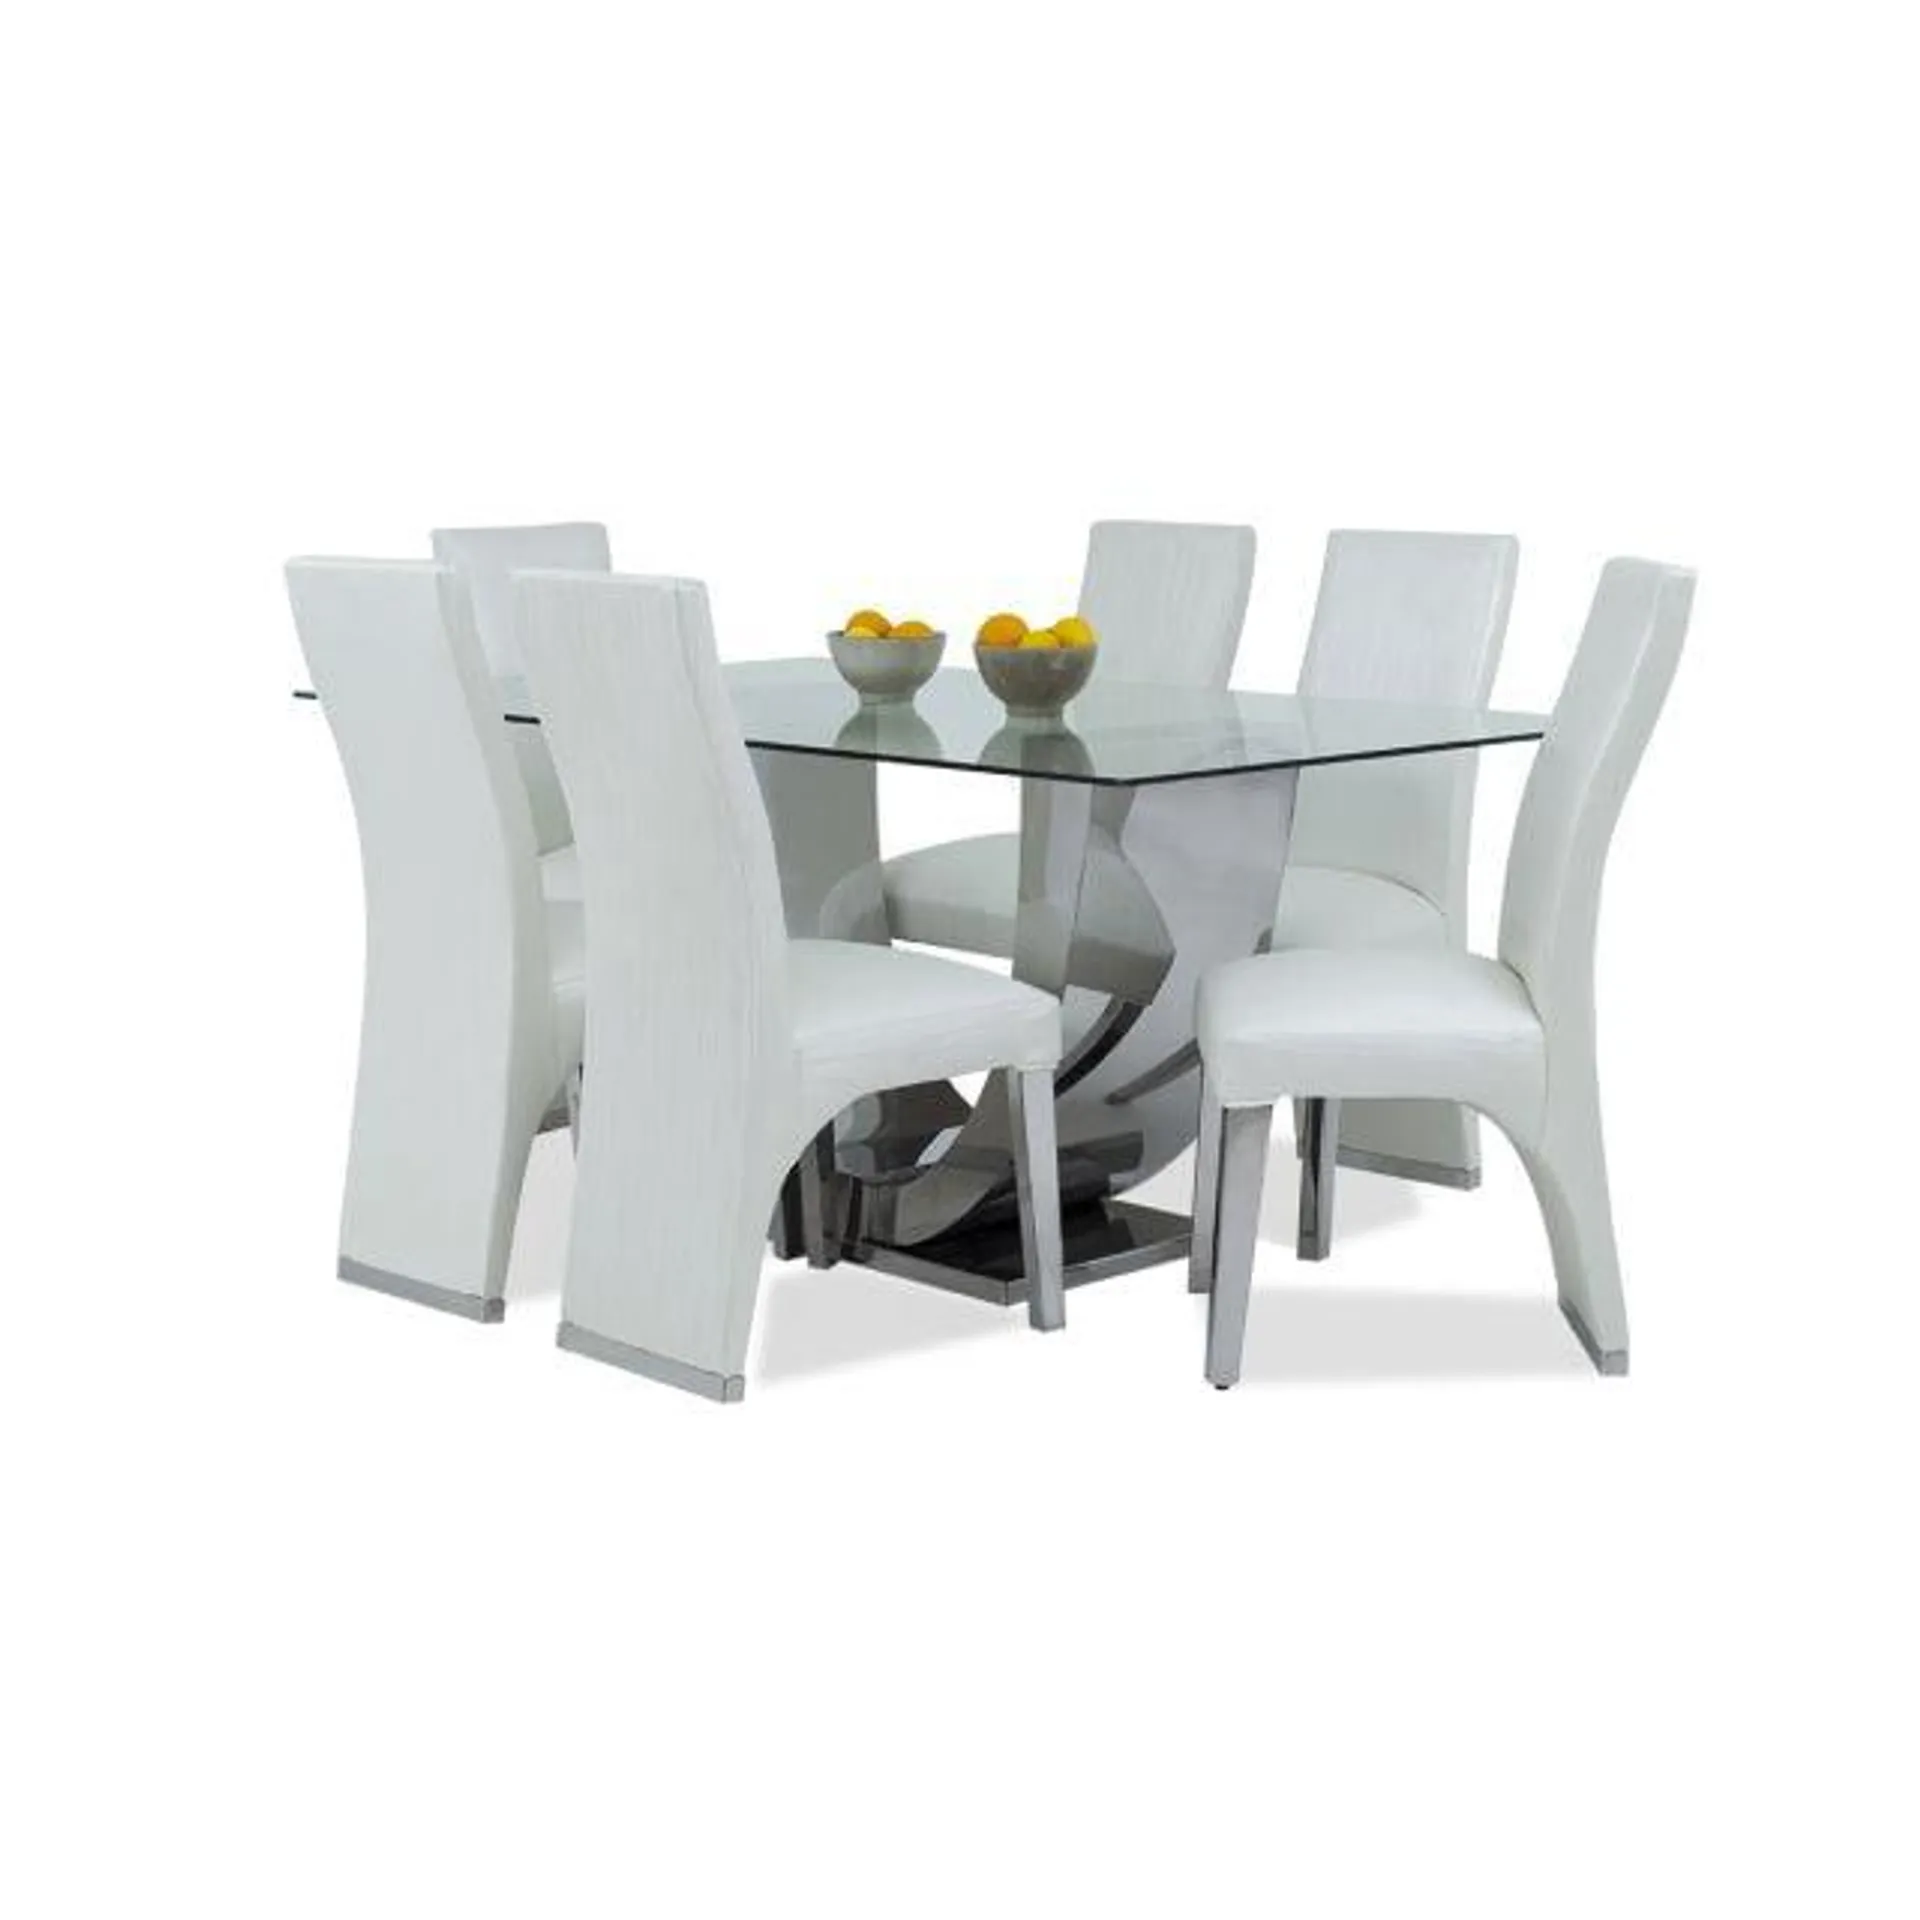 Monarco 6-Seater Dining Room Suite